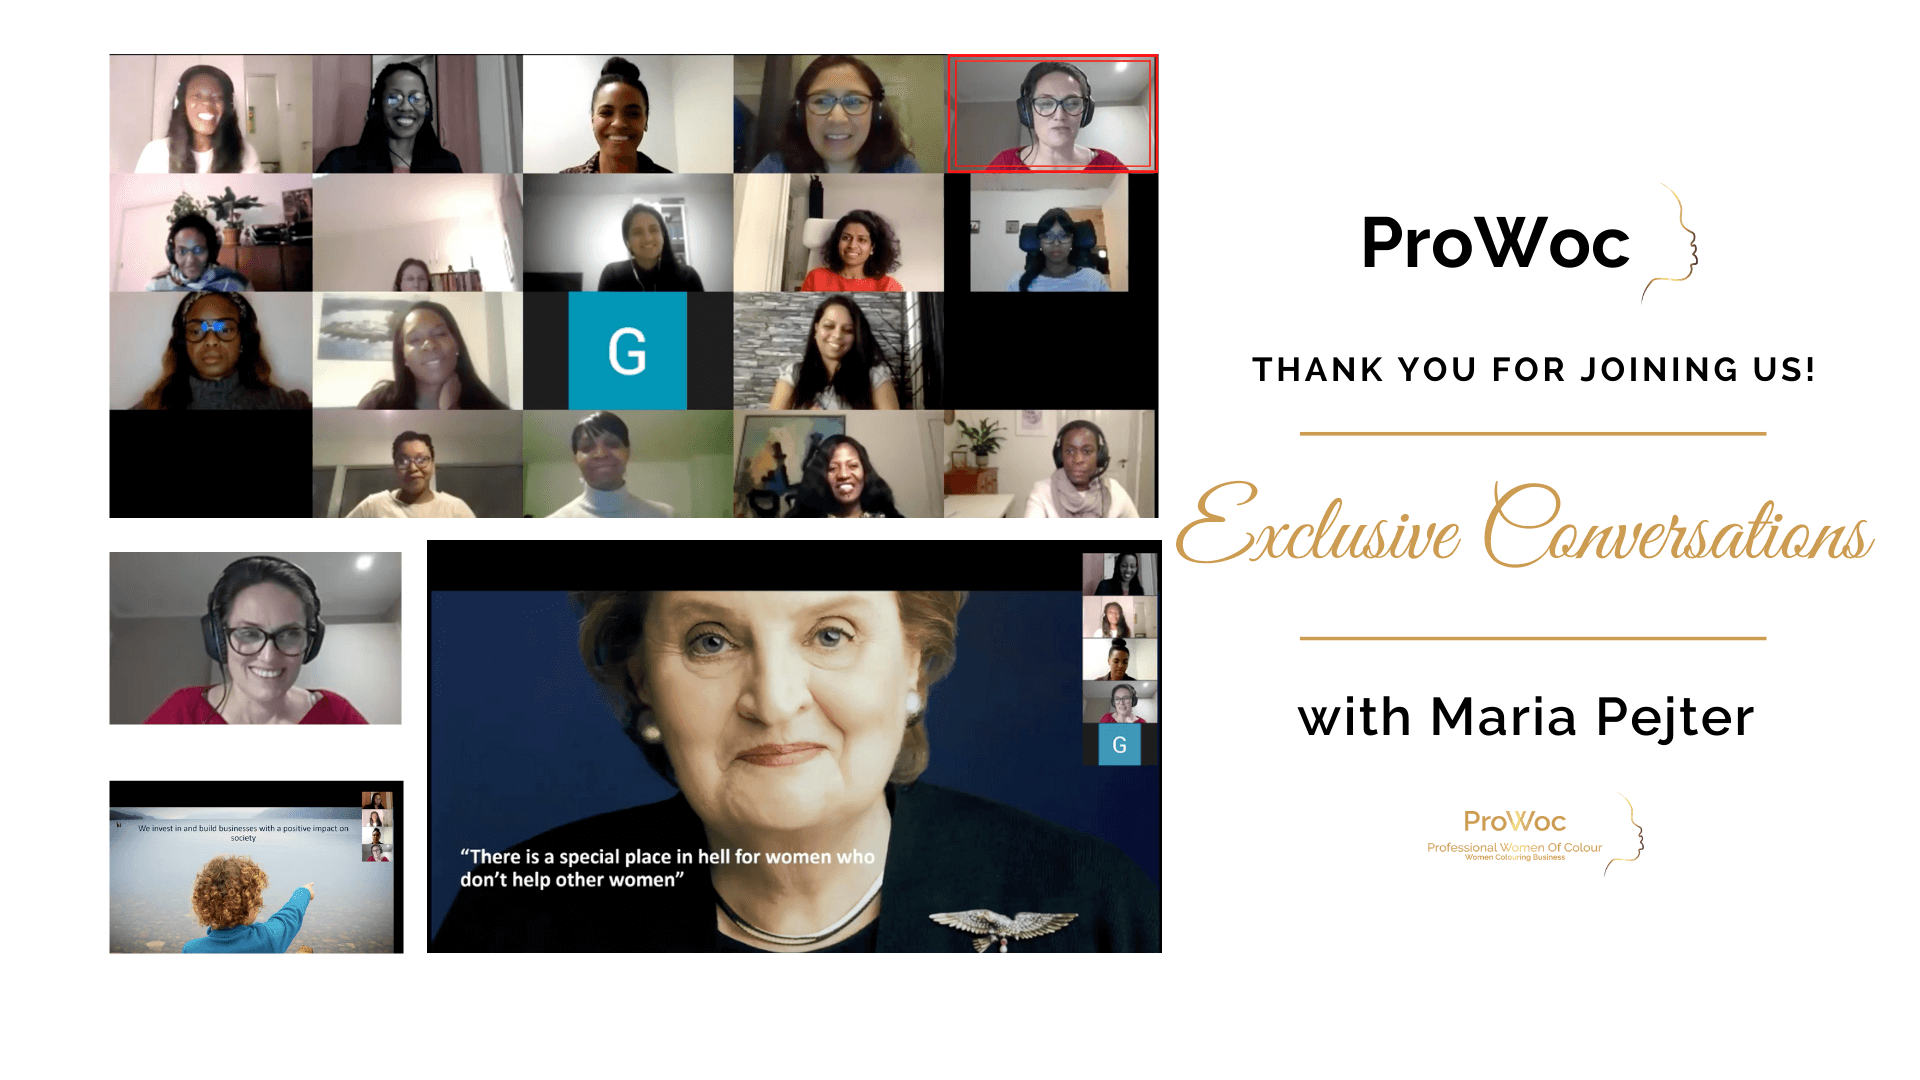 ProWoc Exclusive Event with Maria Pejter